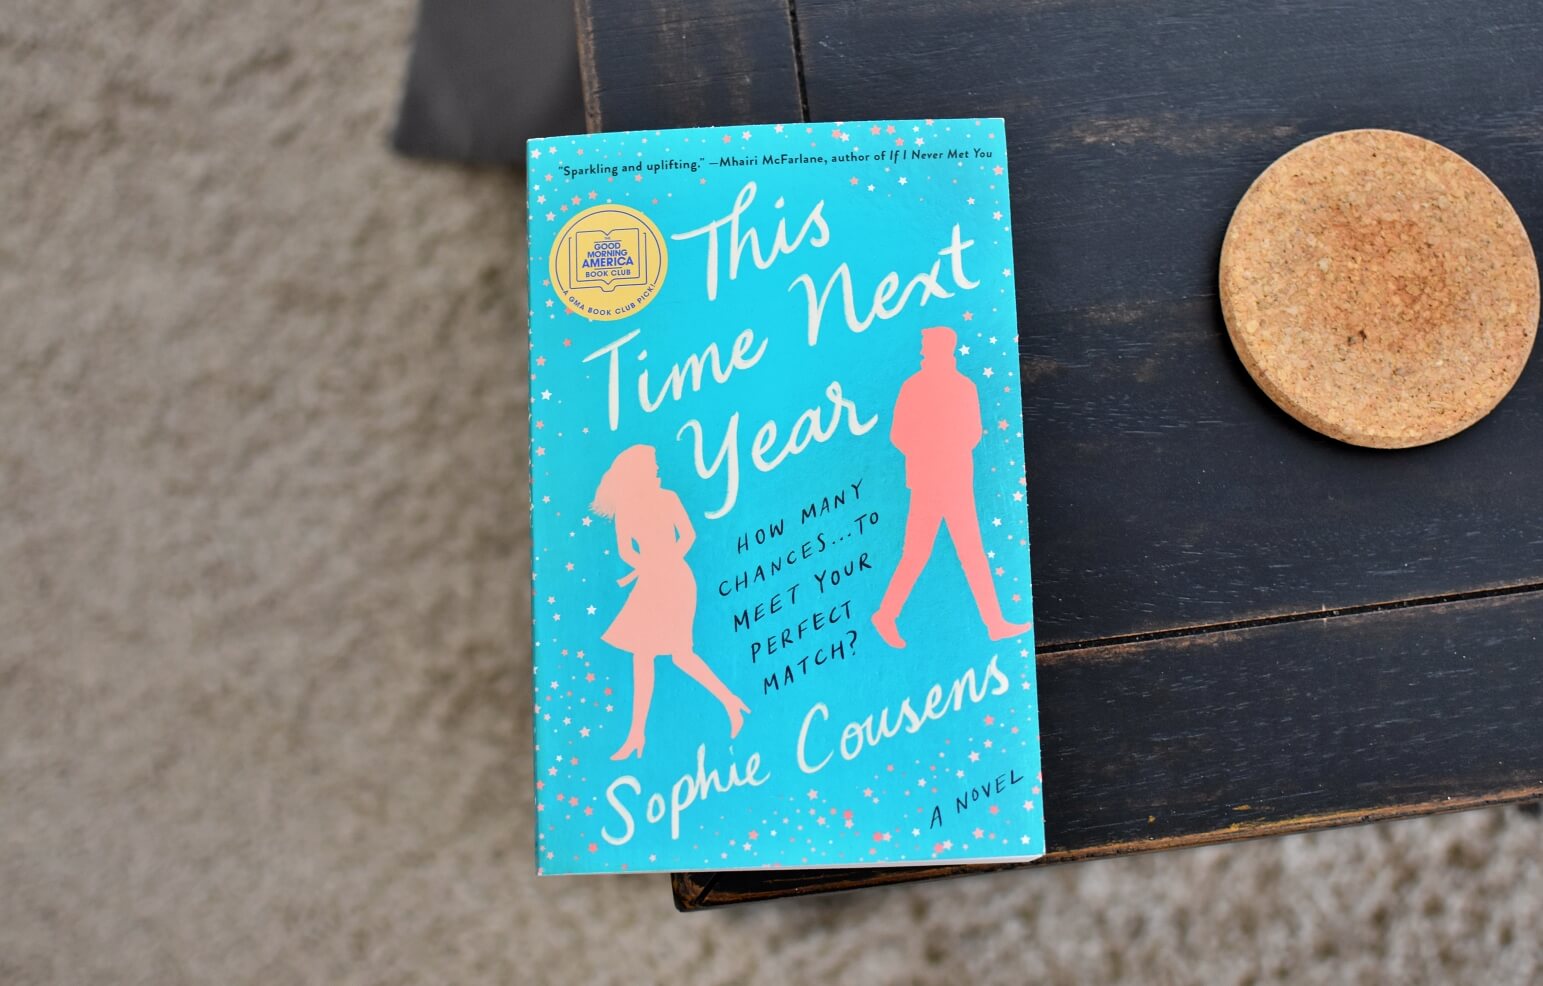 Book Club Questions for This Time Next Year by Sophie Cousens